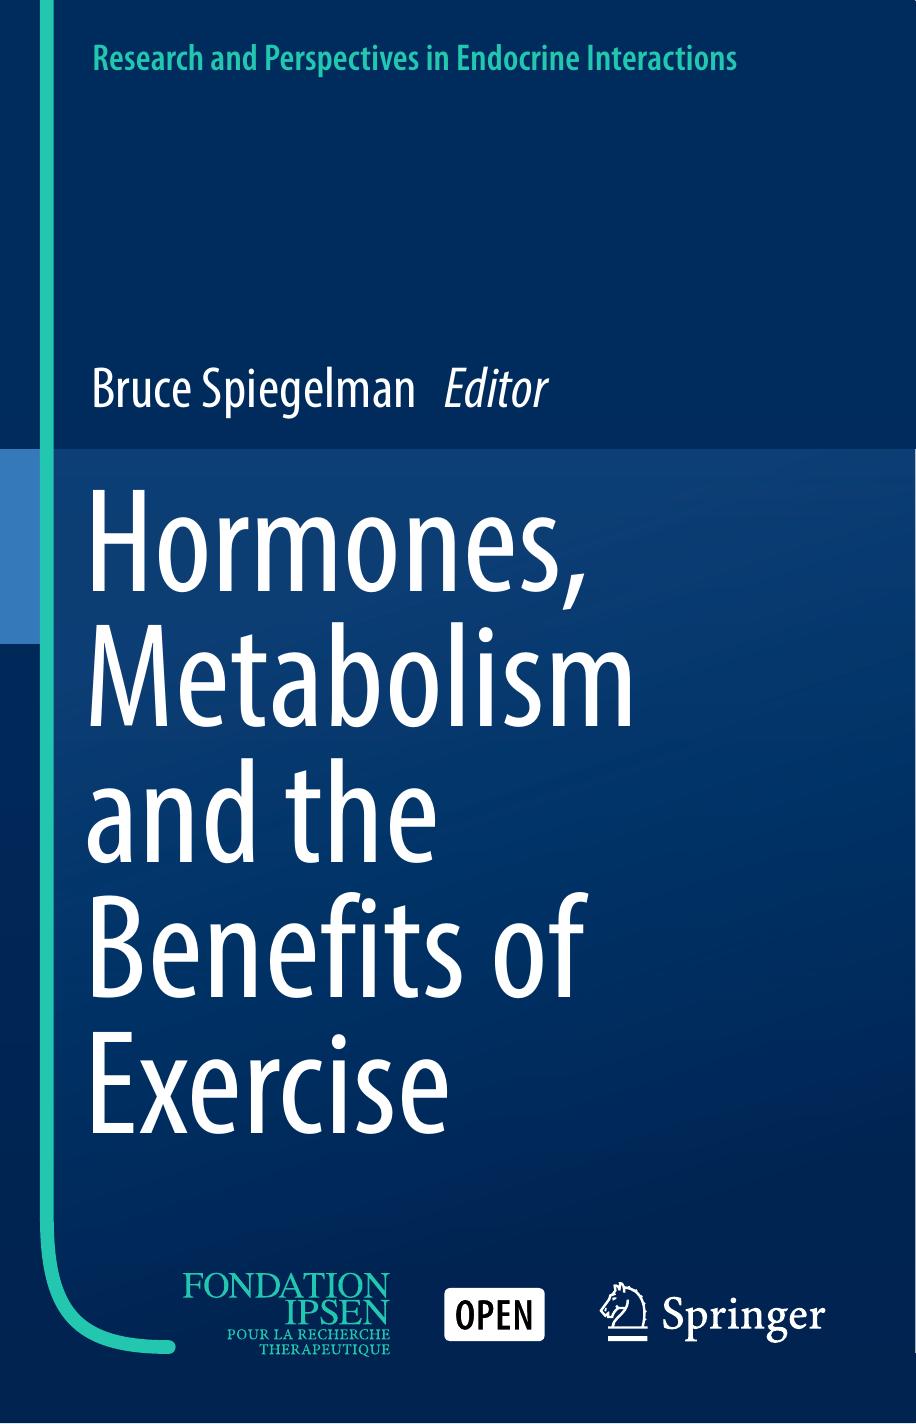 Hormones, Metabolism and the Benefits of Exercise by Bruce Spiegelman